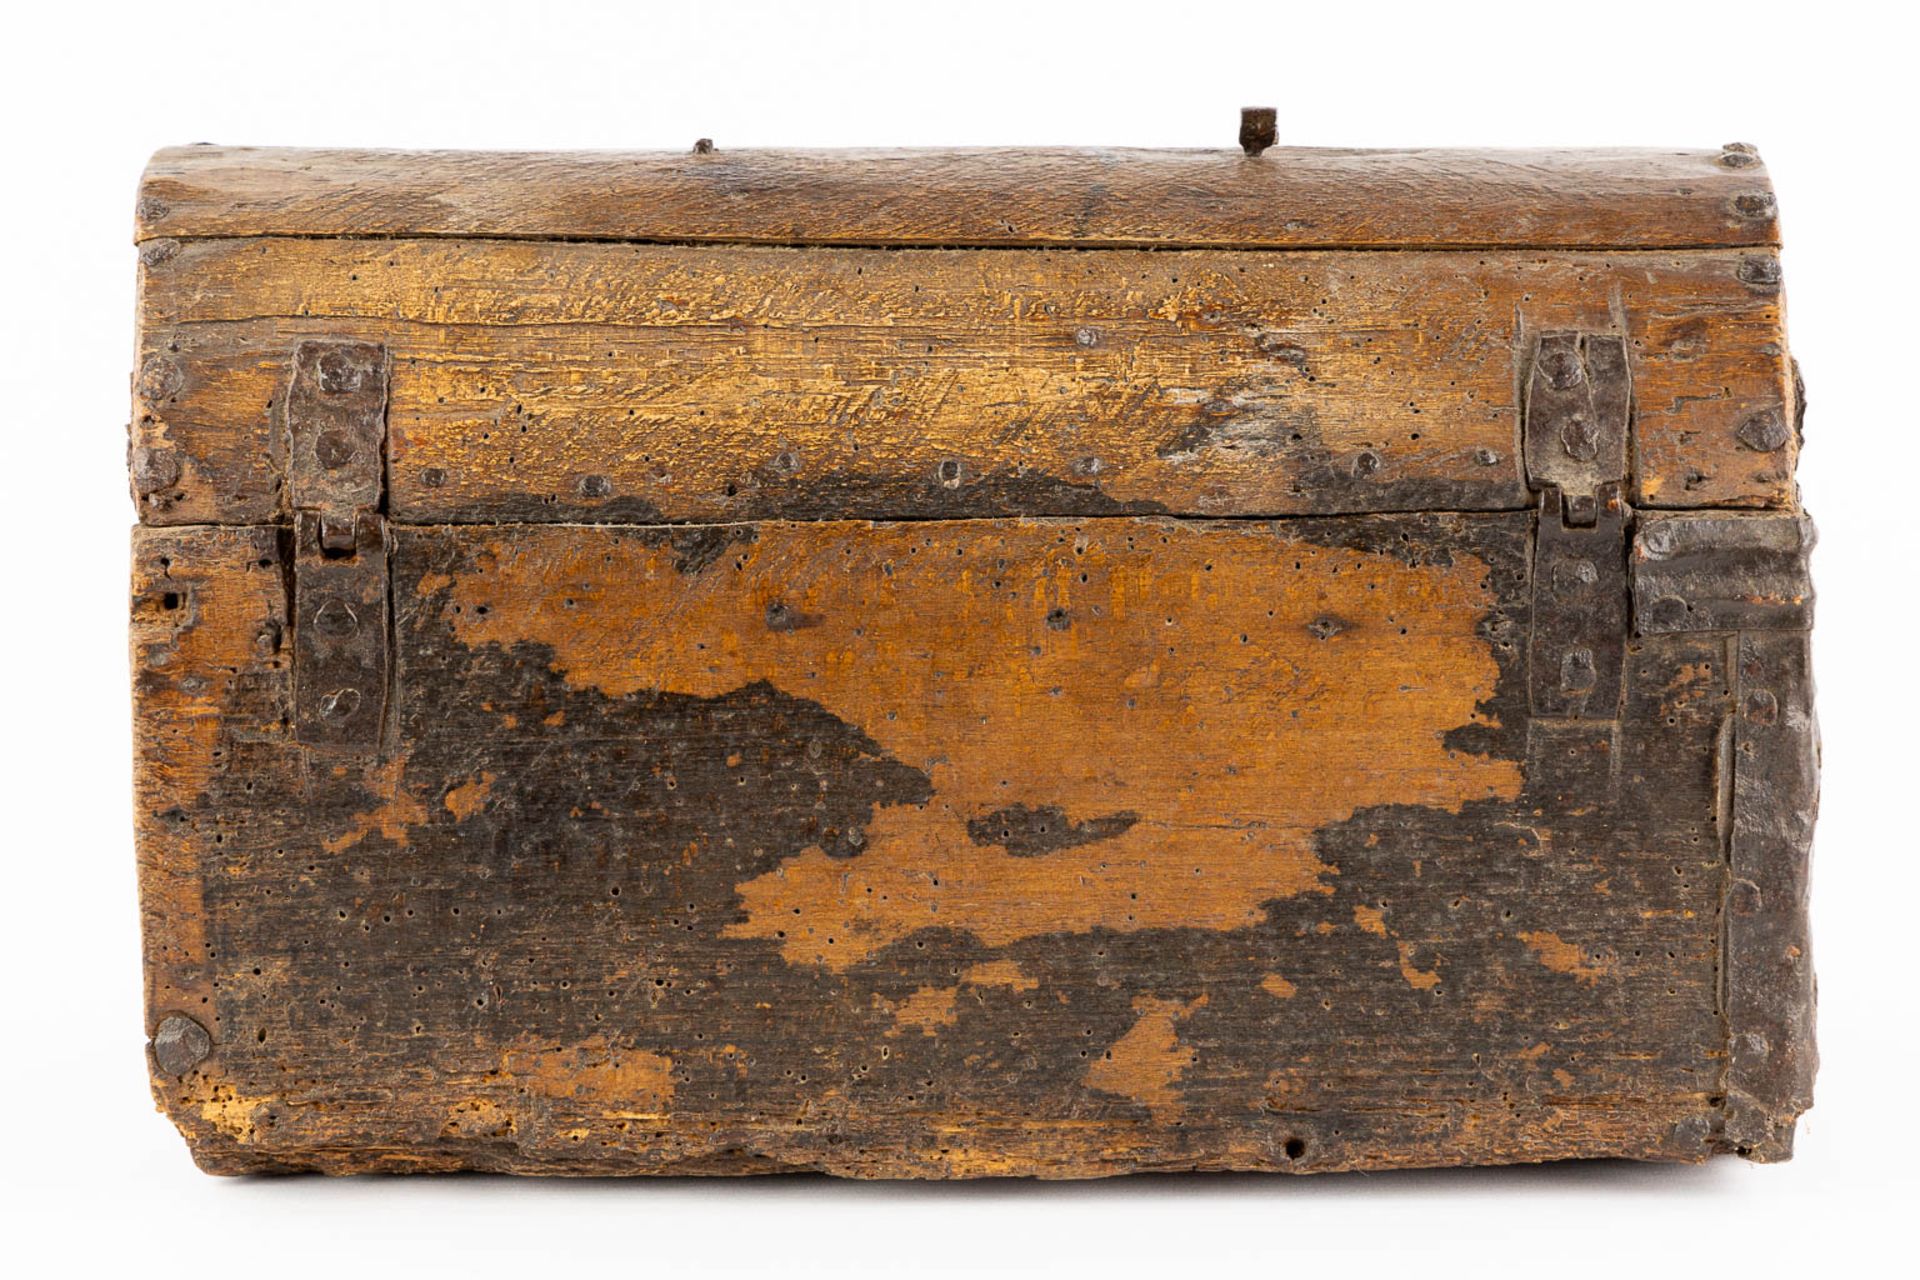 An antique money box or storage chest, wood and wrought iron, 16th/17th C. (L:20 x W:36 x H:22 cm) - Image 5 of 14